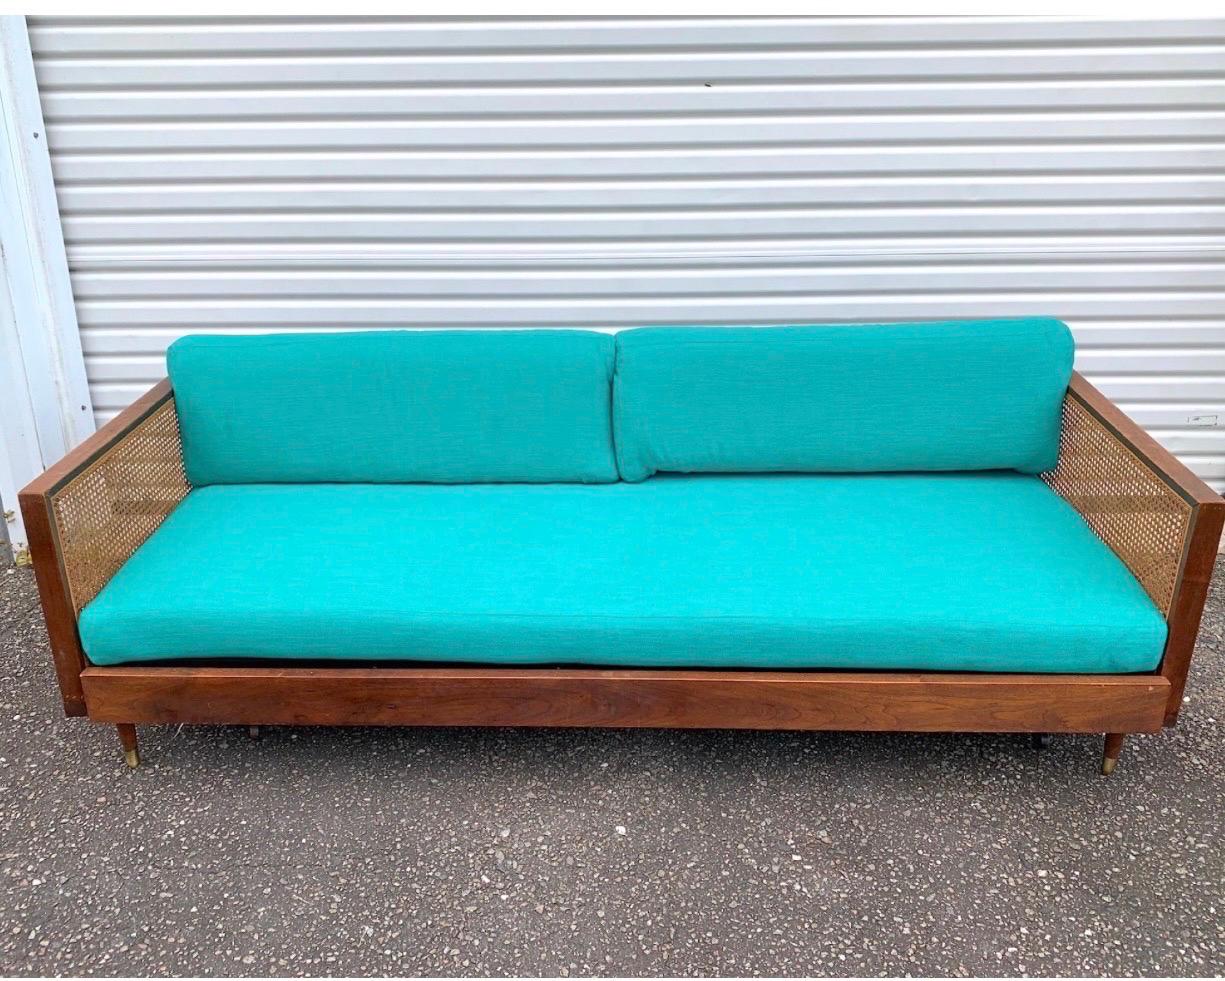 This sexy couch is in its original walnut and cane finish but has brand spanking new teal high performance sunbrela cushions. And it can also pop out to be a trundle bed, which is fully functional. The cane sides are free of holes and the upholstery